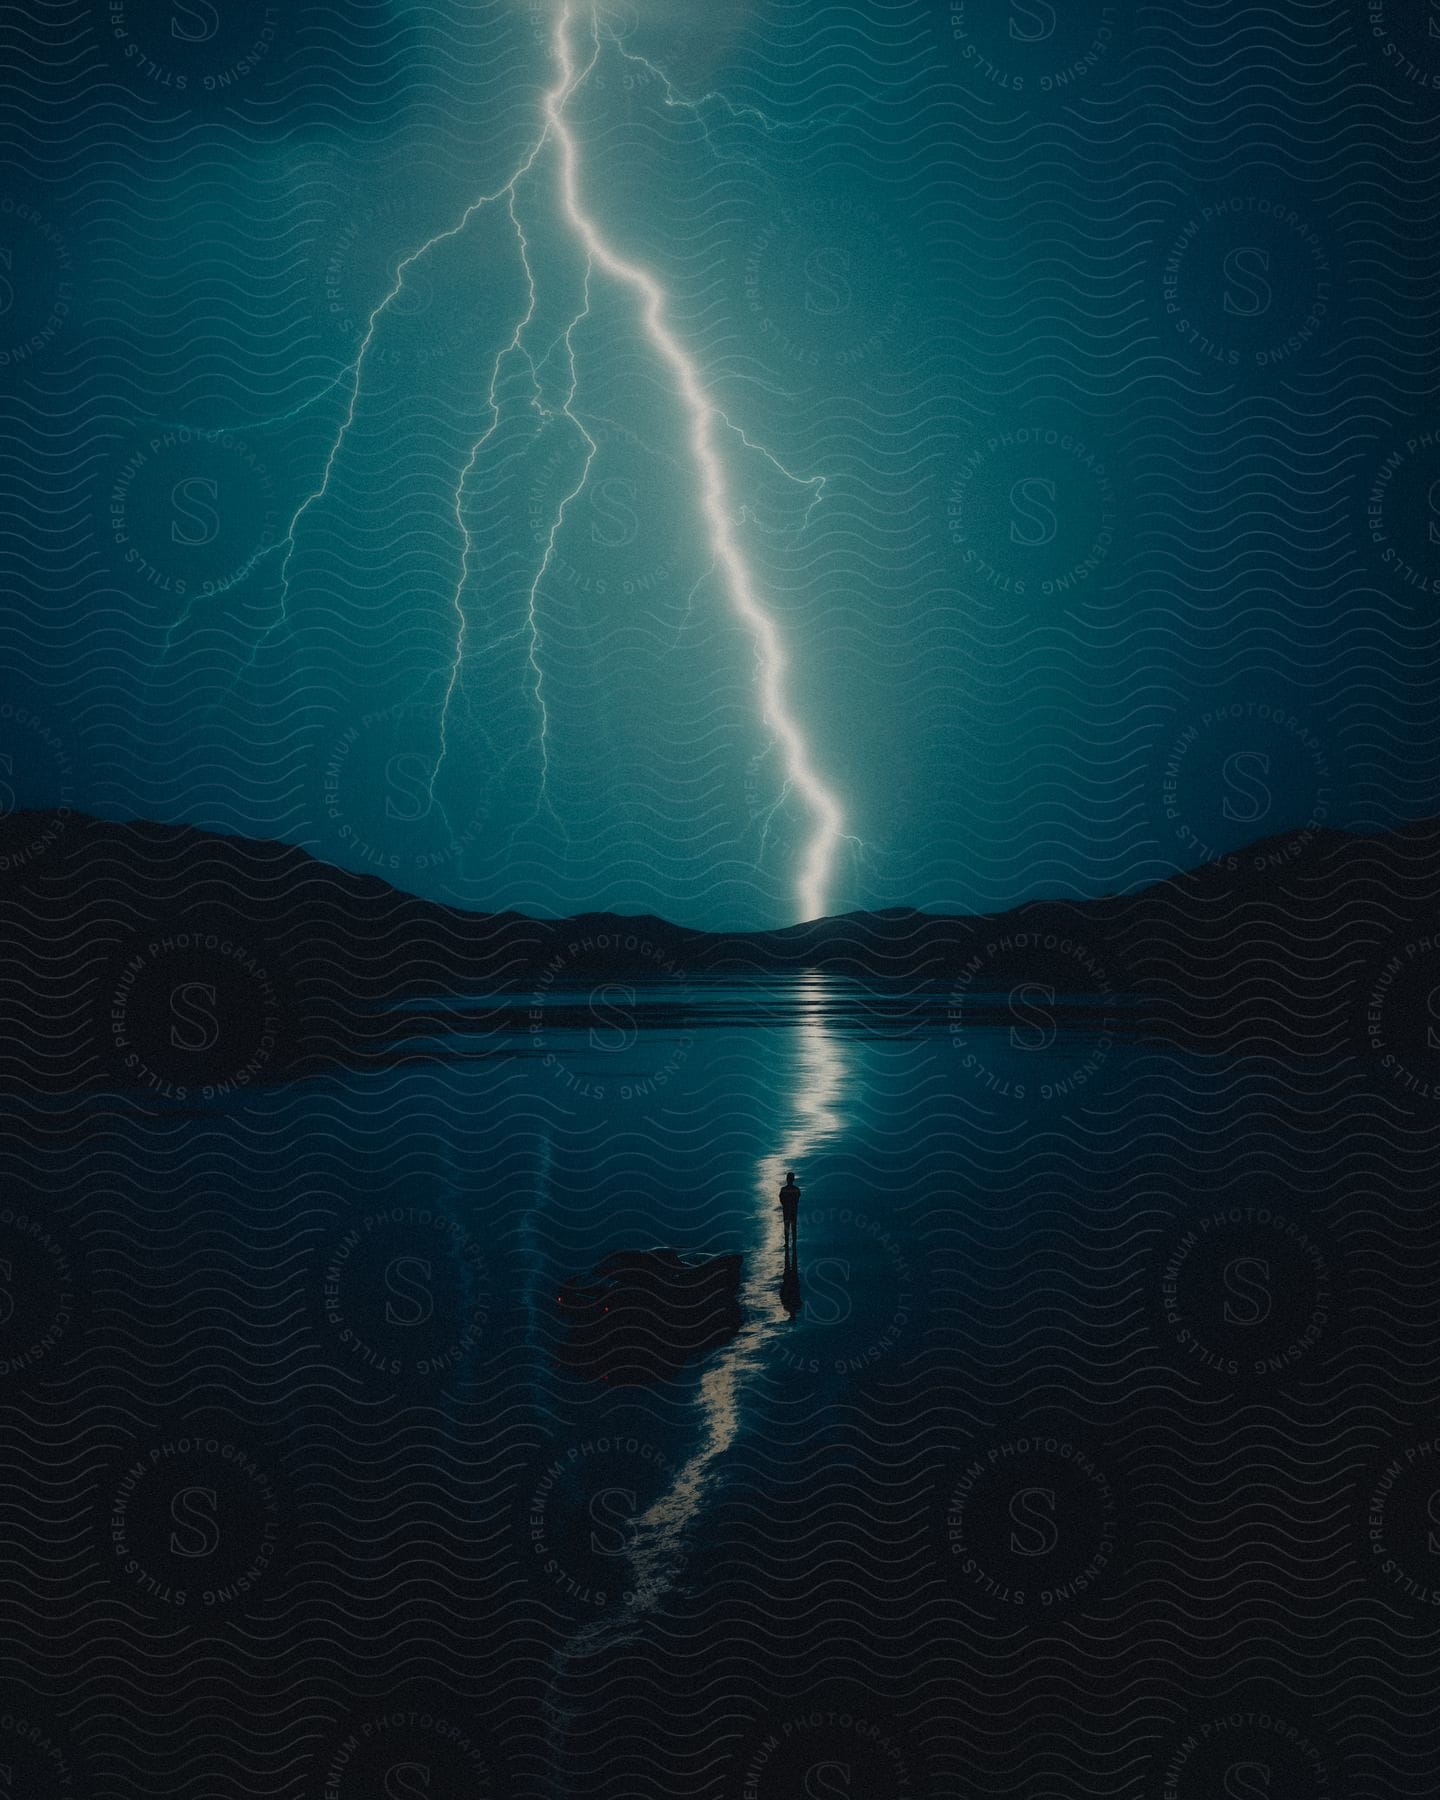 A powerful thunderstorm over a lake with mountains in the background